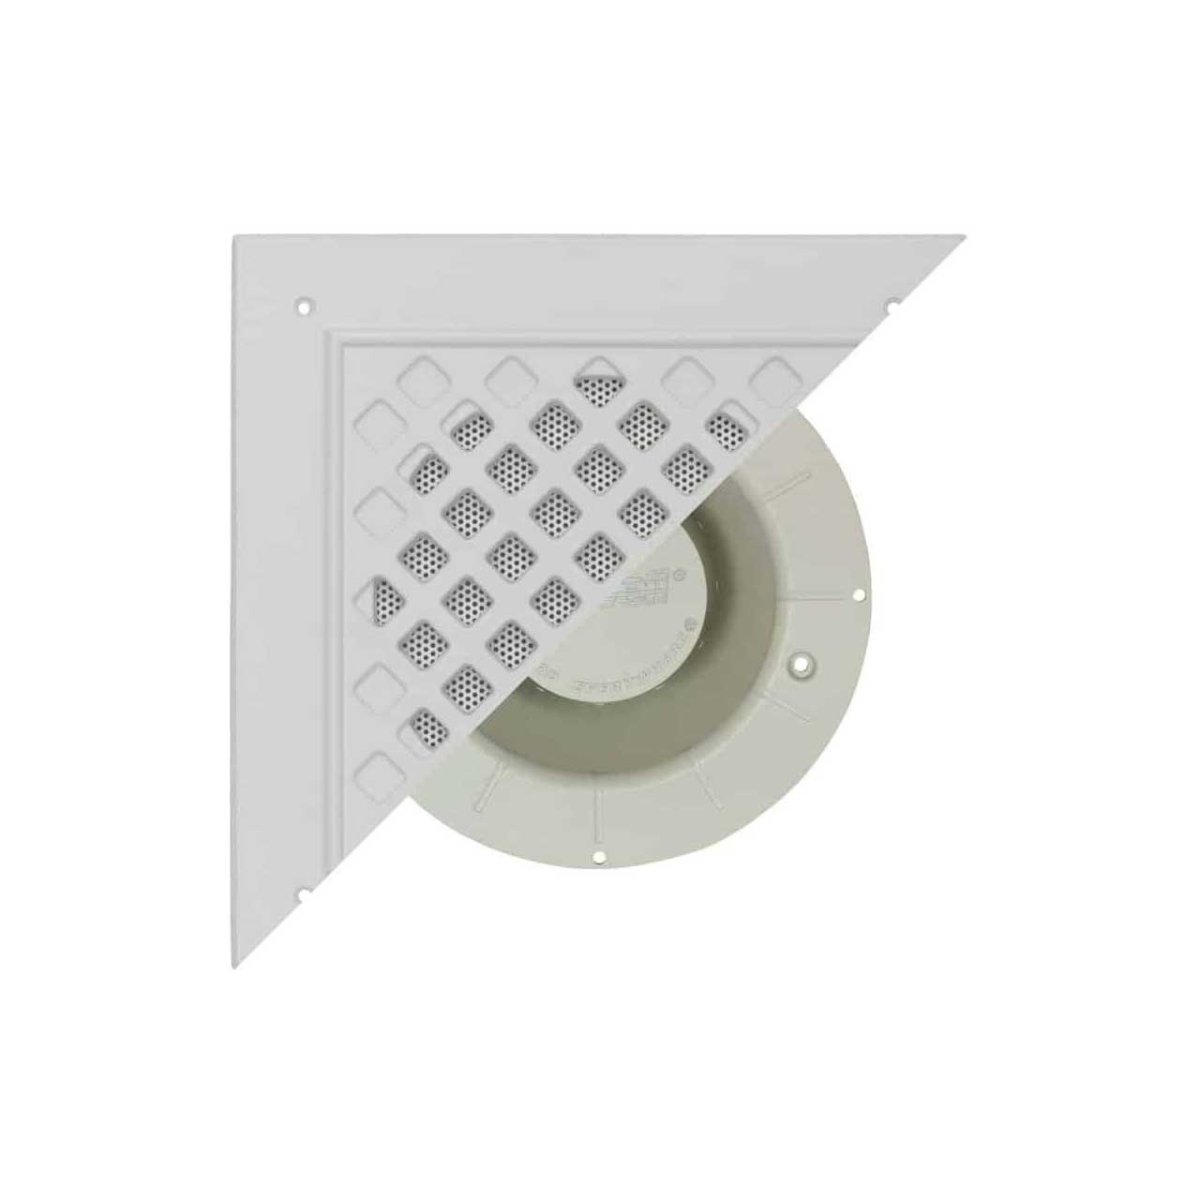 Picture of Lowell Manufacturing LMC-VRG-LUH15TX 15 watt Indoor & Outdoor Paging Speaker Assembly with Flush-Mount Re-Entrant Unihorn & Vandal-Resistant Grill - White